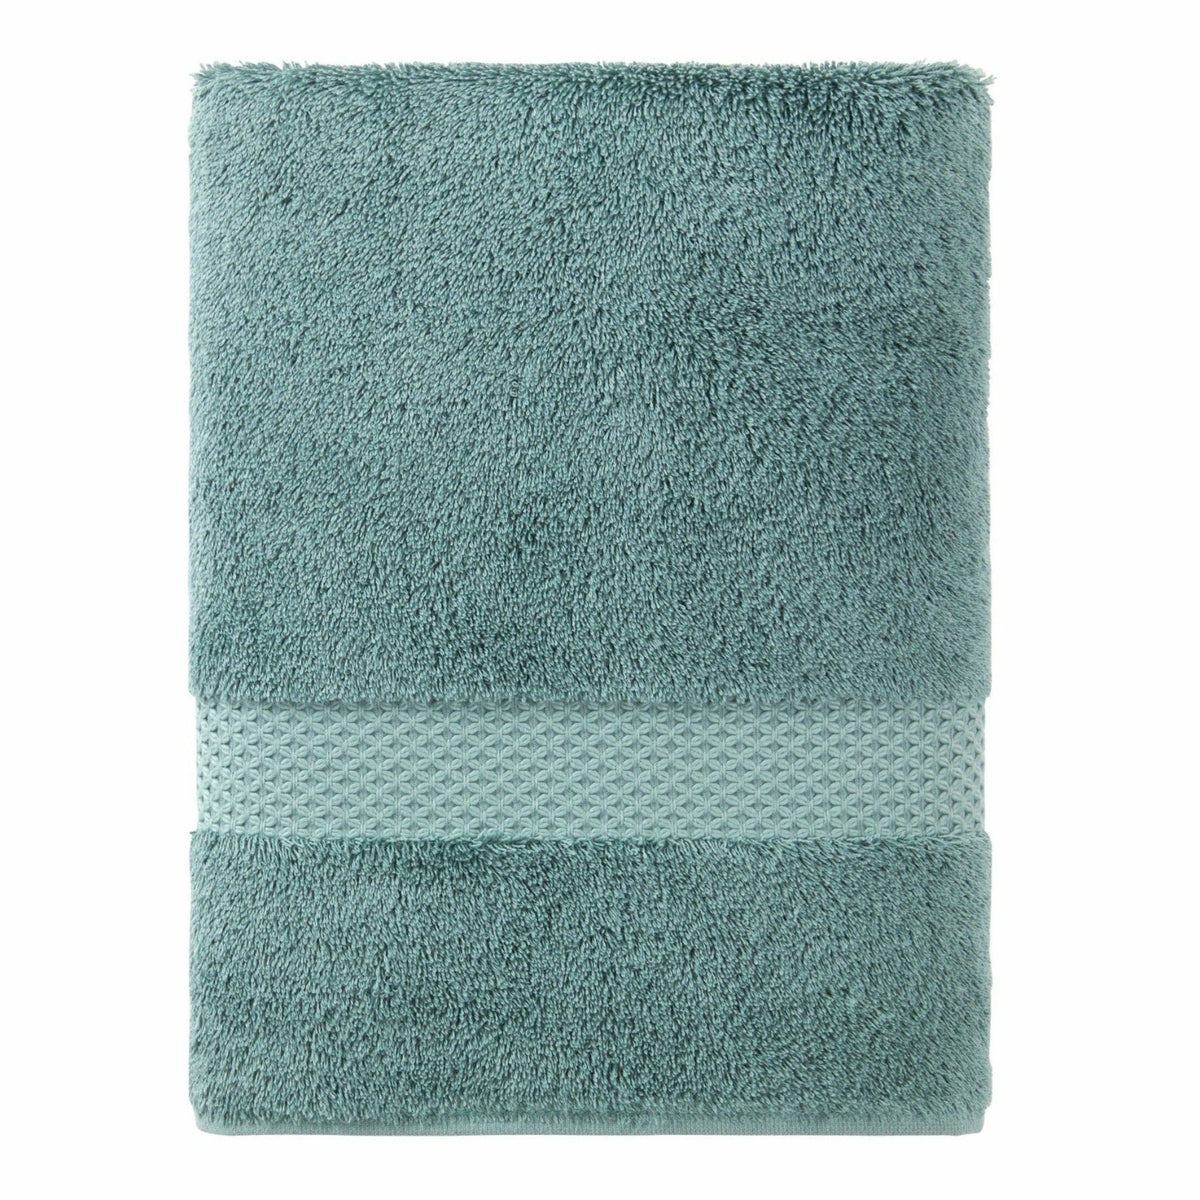 Yves Delorme Etoile Bath Towels and Mats Silo Fjord Fine Linens